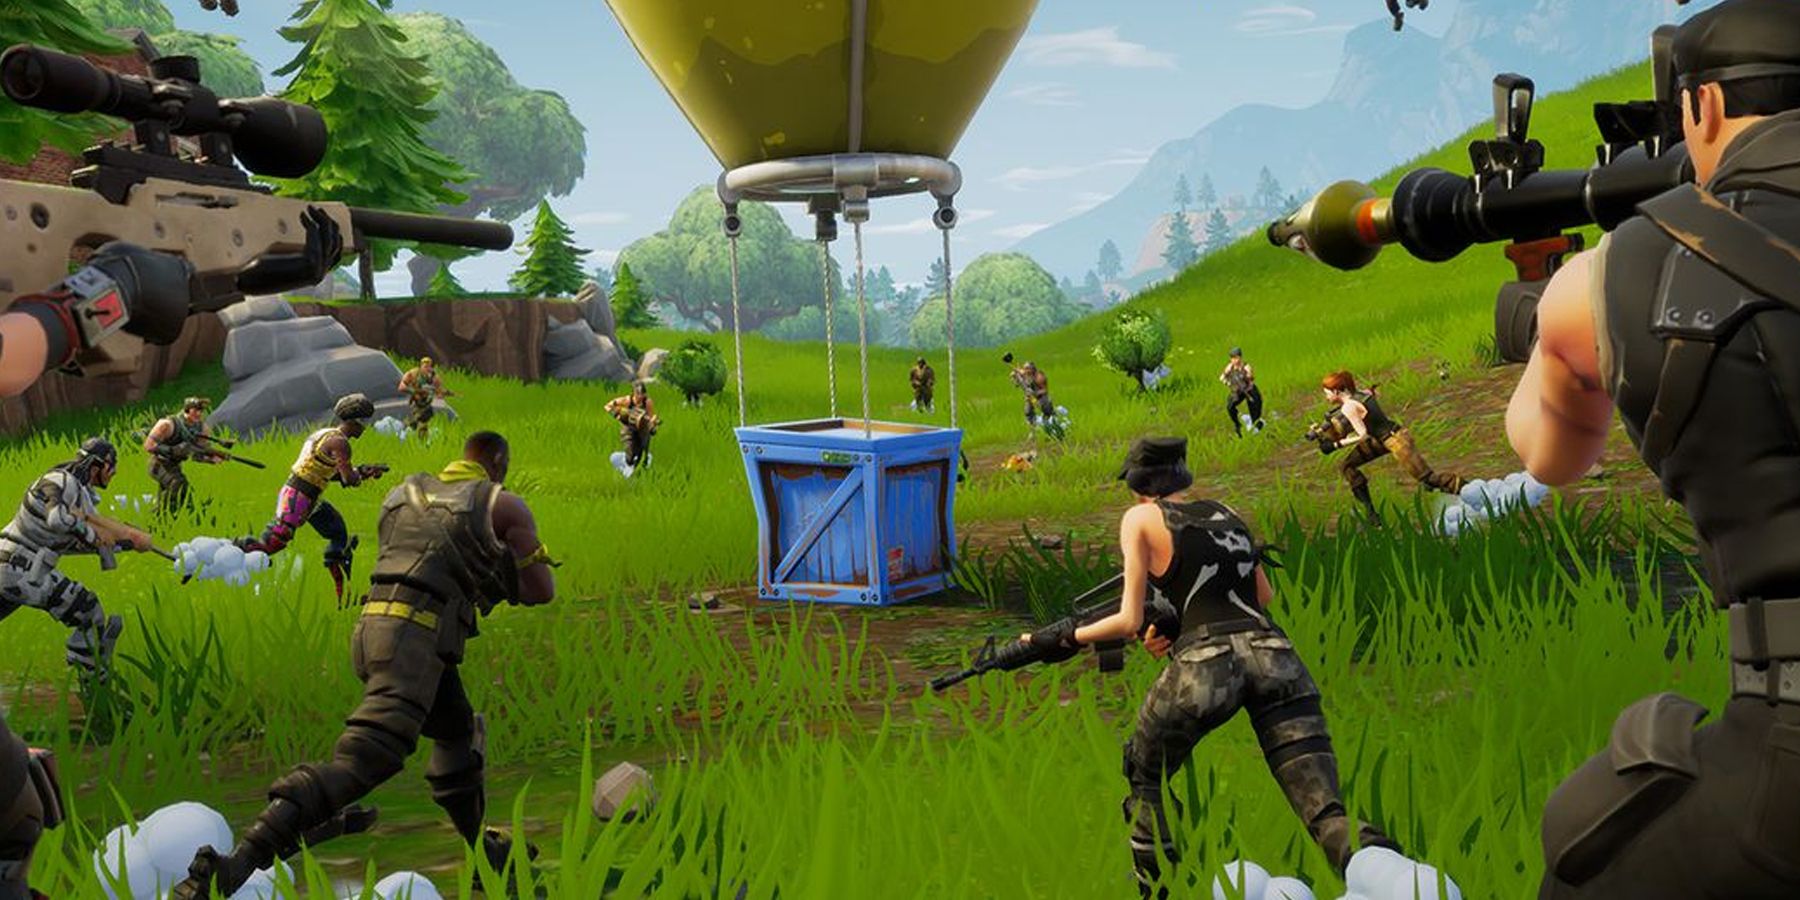 Players moving in Fortnite